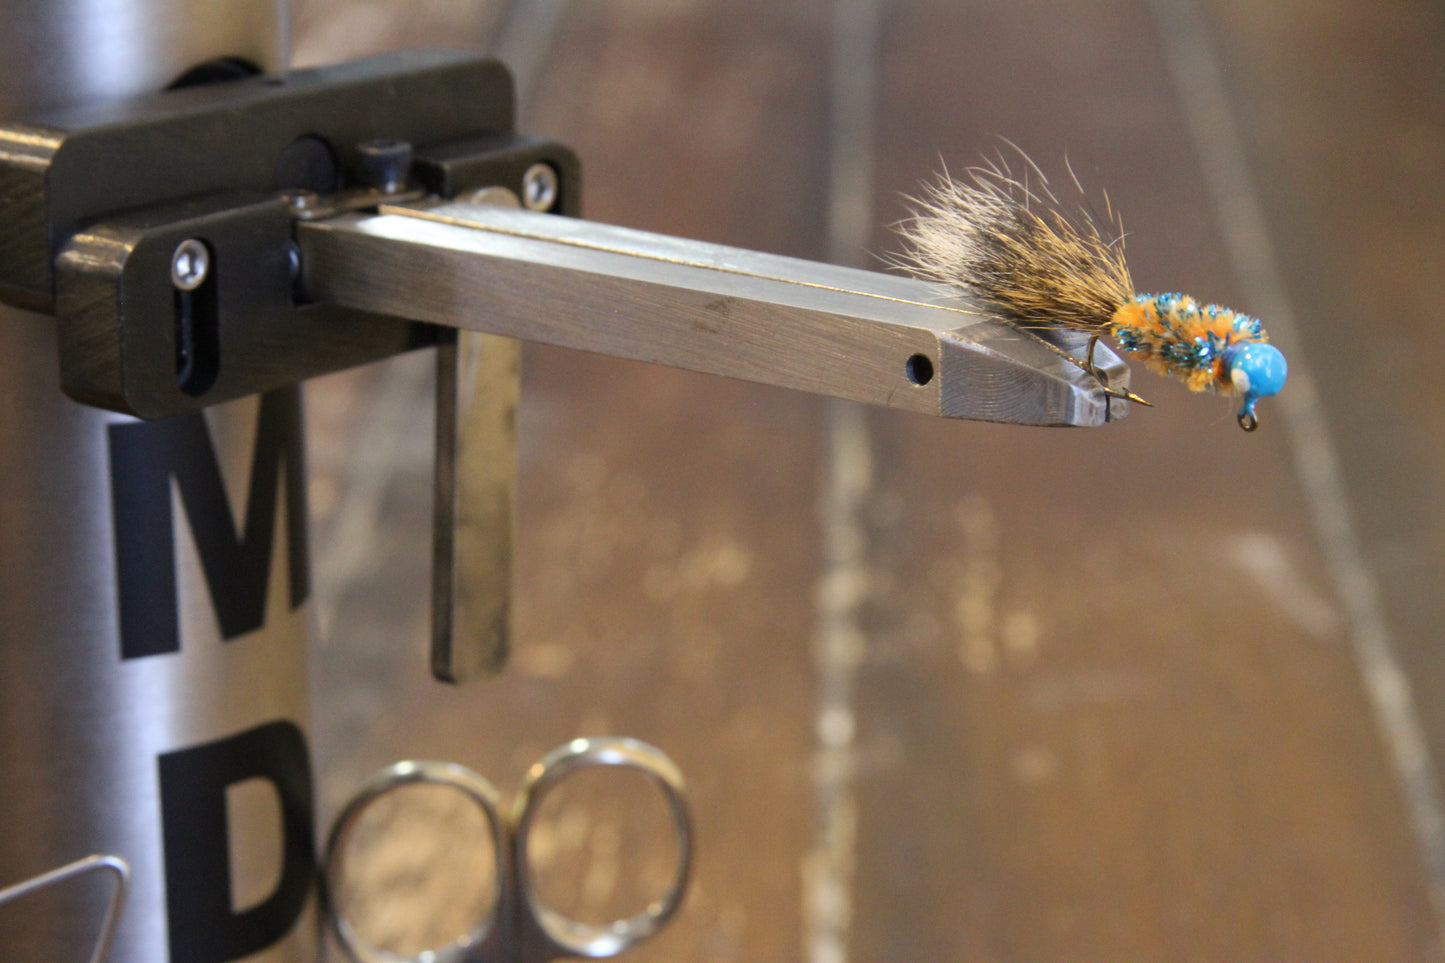 THE MDK FLY VISE